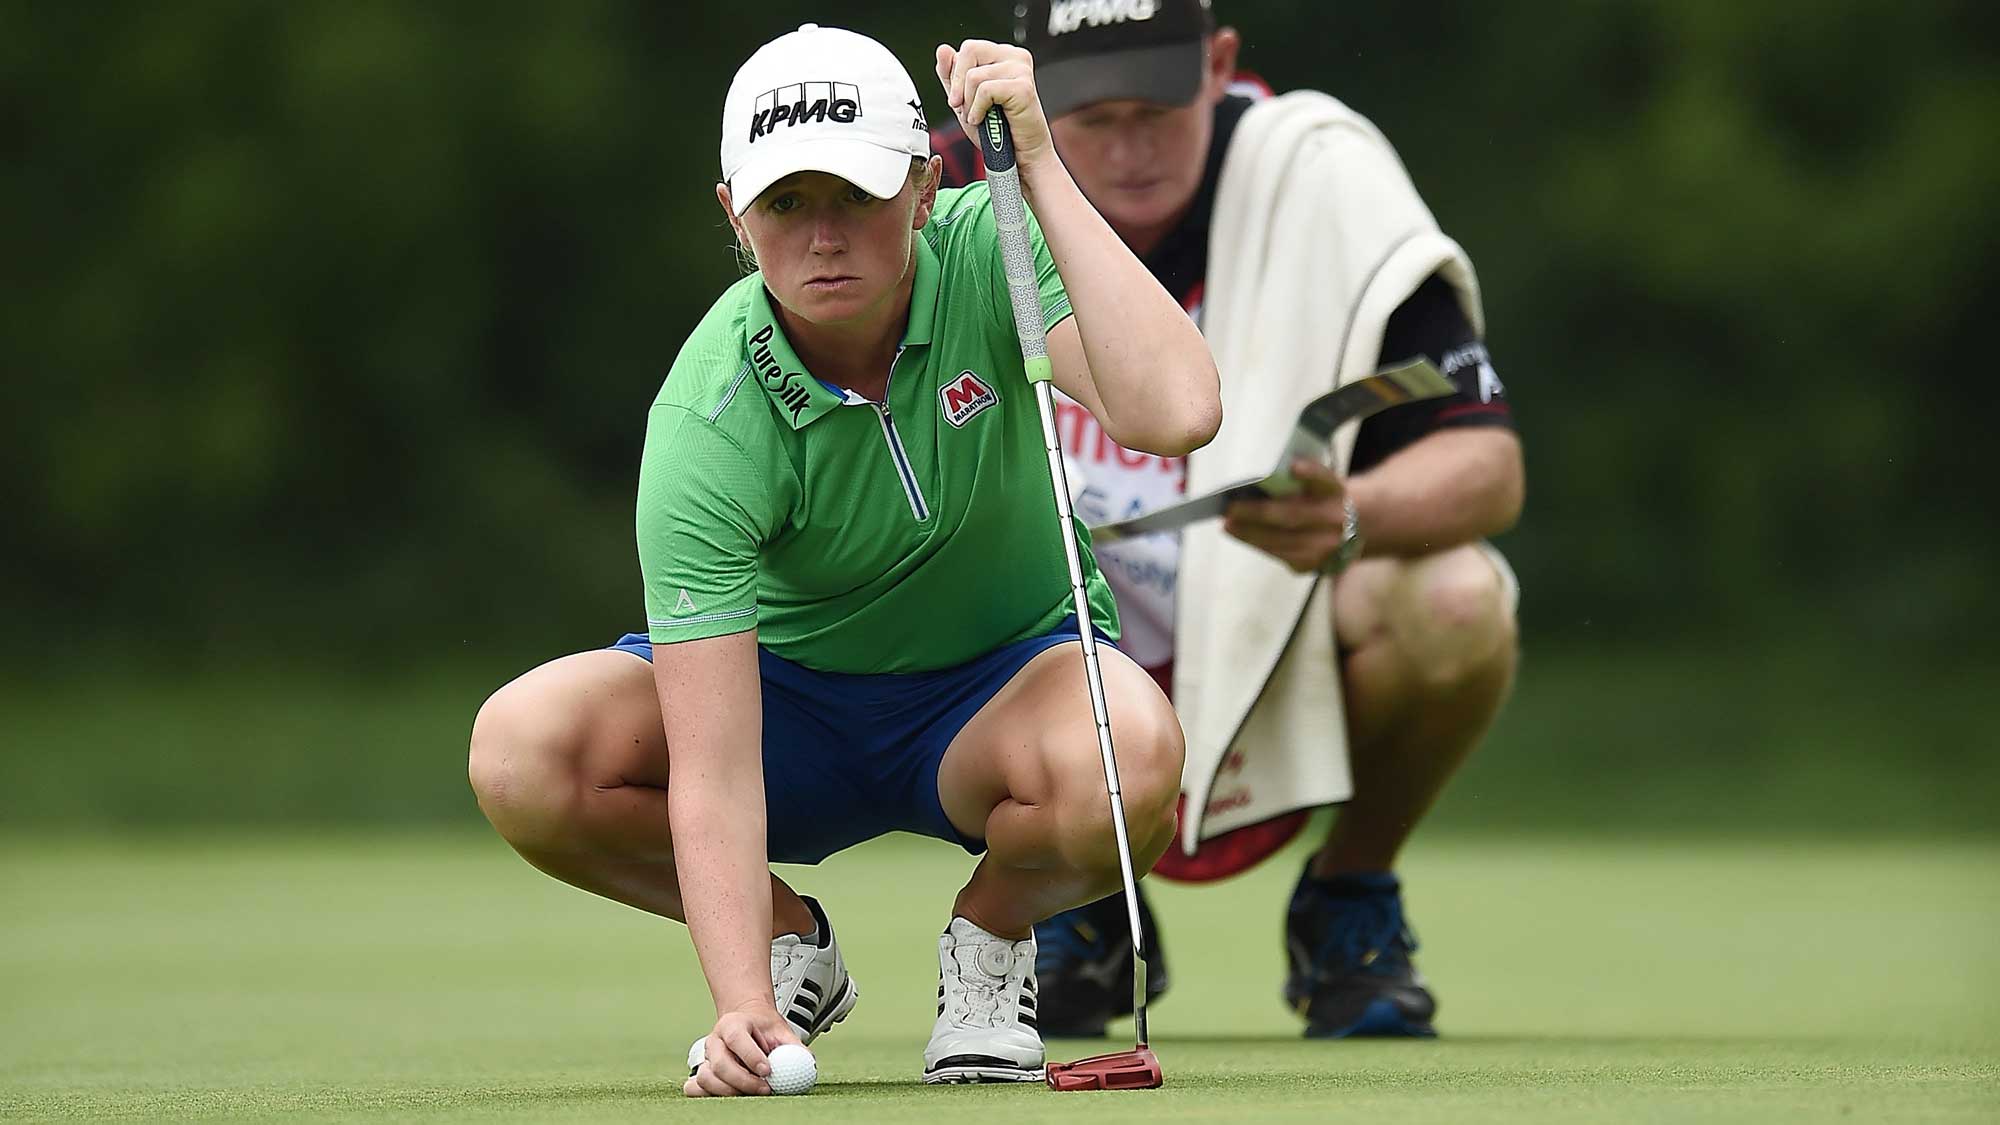 Stacy Lewis lines up a putt on the second green during the third round of the Meijer LPGA Classic